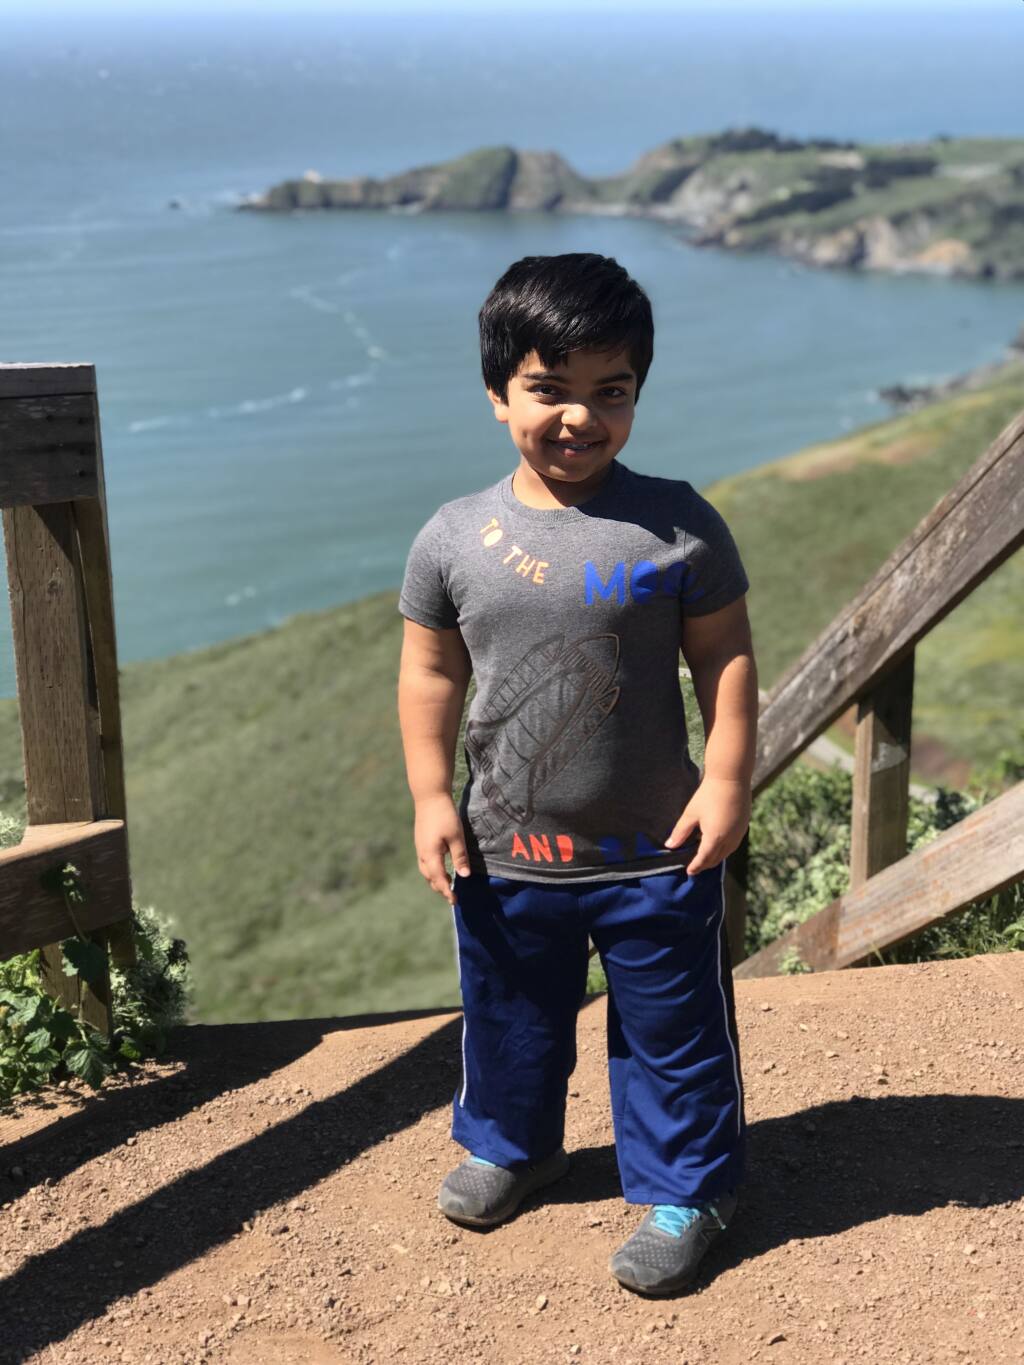 Ahmin Haider, seen here near the Golden Gate Bridge in 2018 at age 10, is enrolled in BioMarin's clinical trials for a medication to treat achondroplasia, or dwarfism. (courtesy of the Haider family)